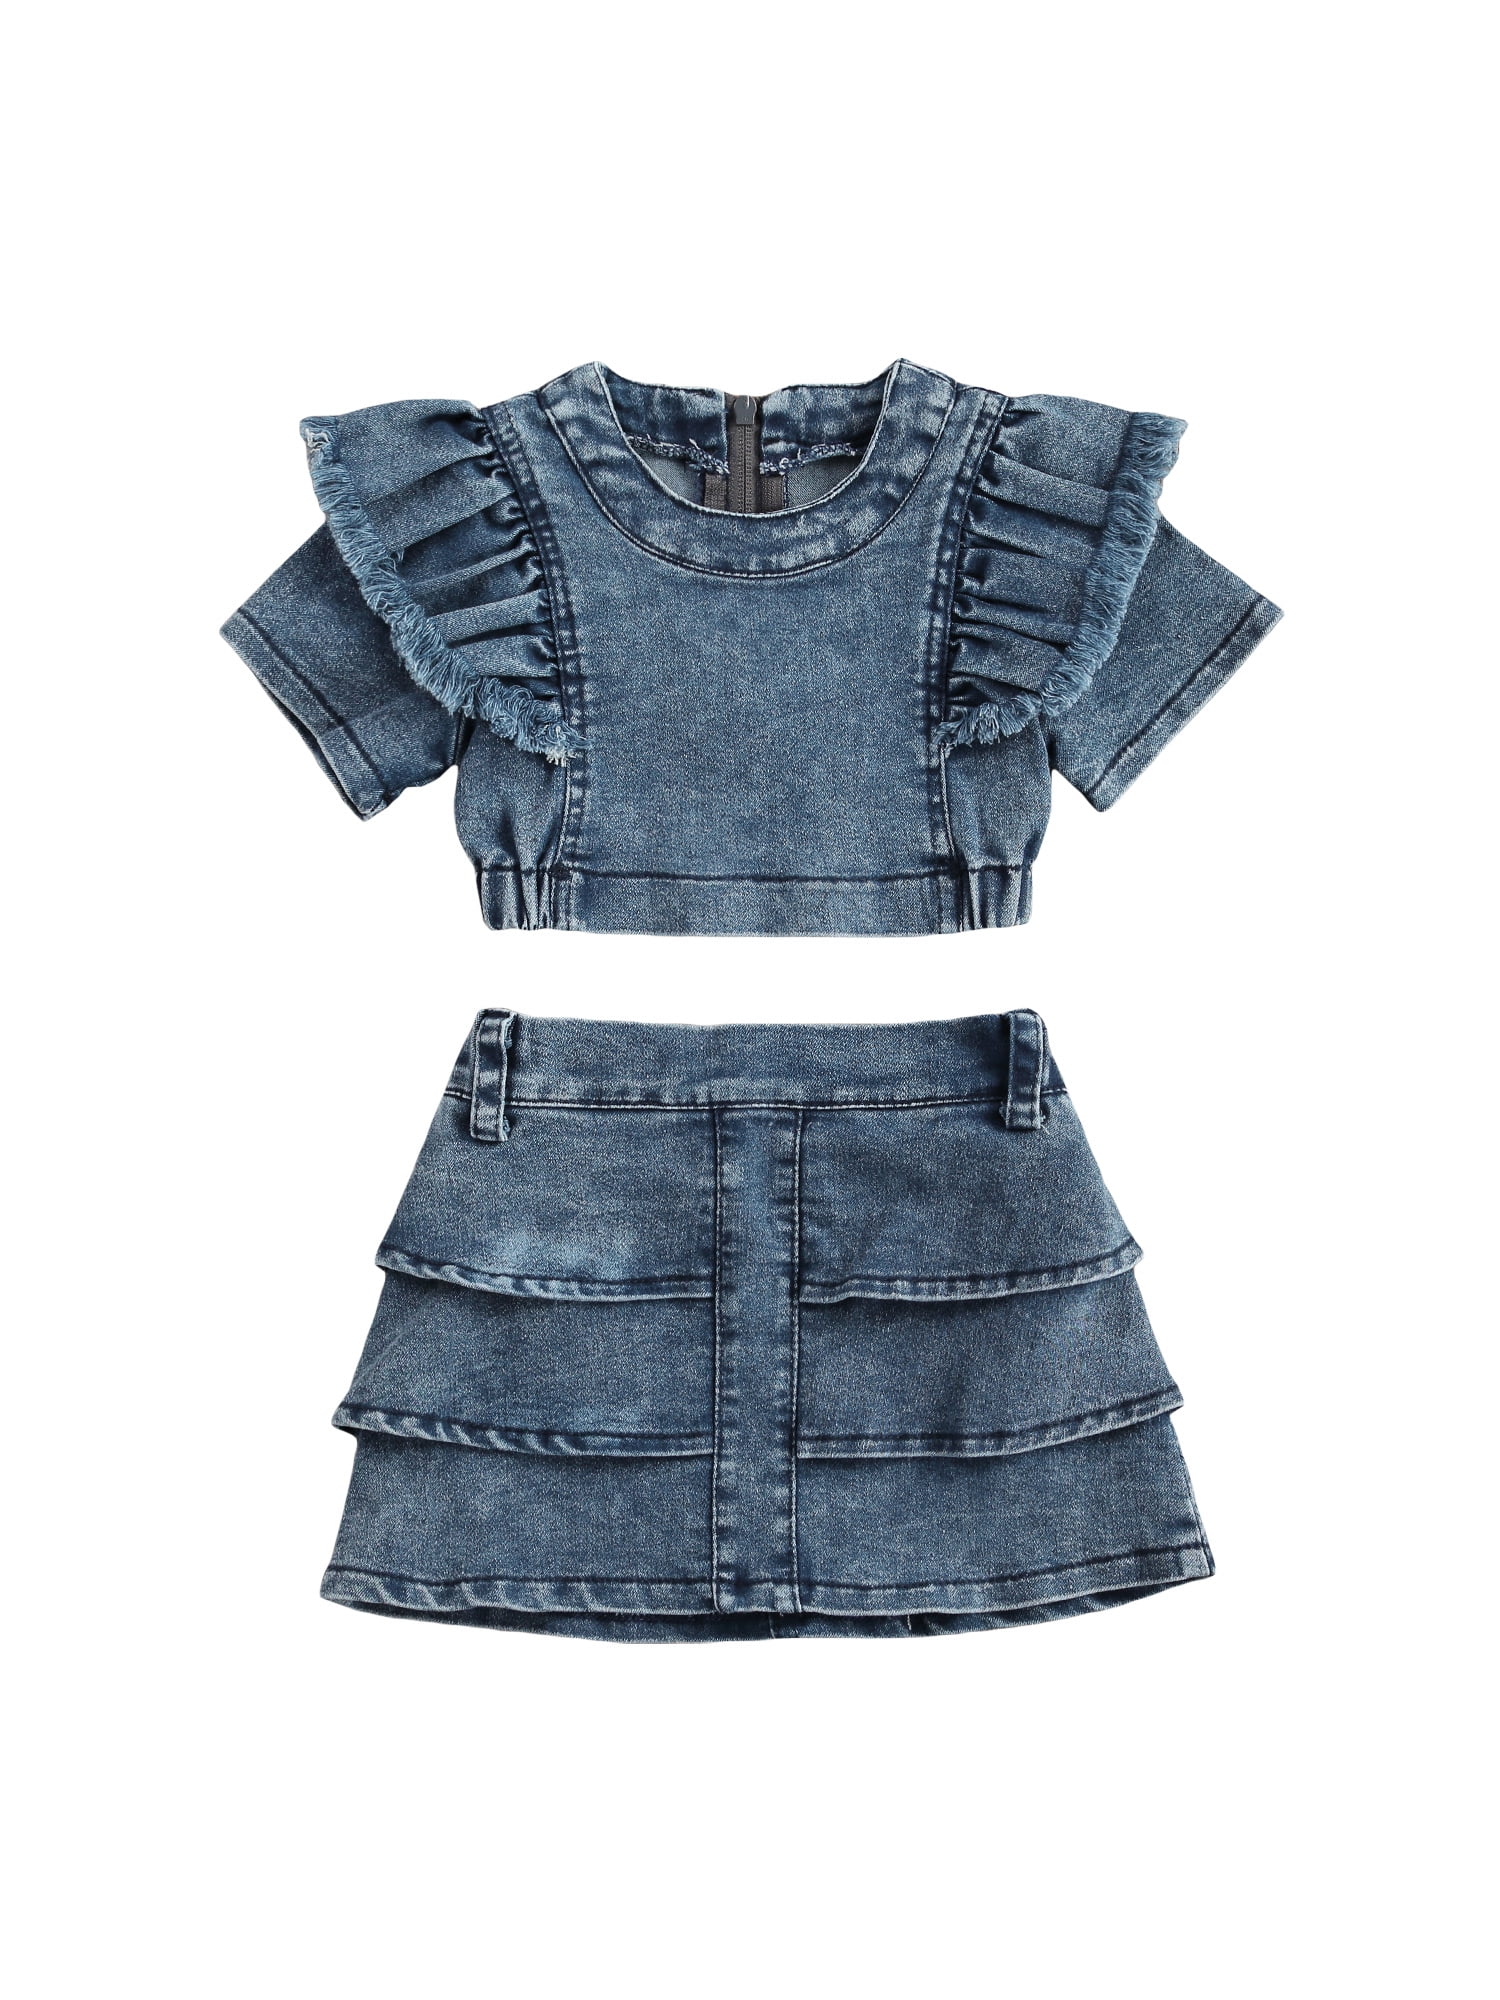 Toddler Kids Clothing Baby Girls Ruffle Crop Top and High Waist Layered Denim Shorts Skirts Outfits Clothes Set